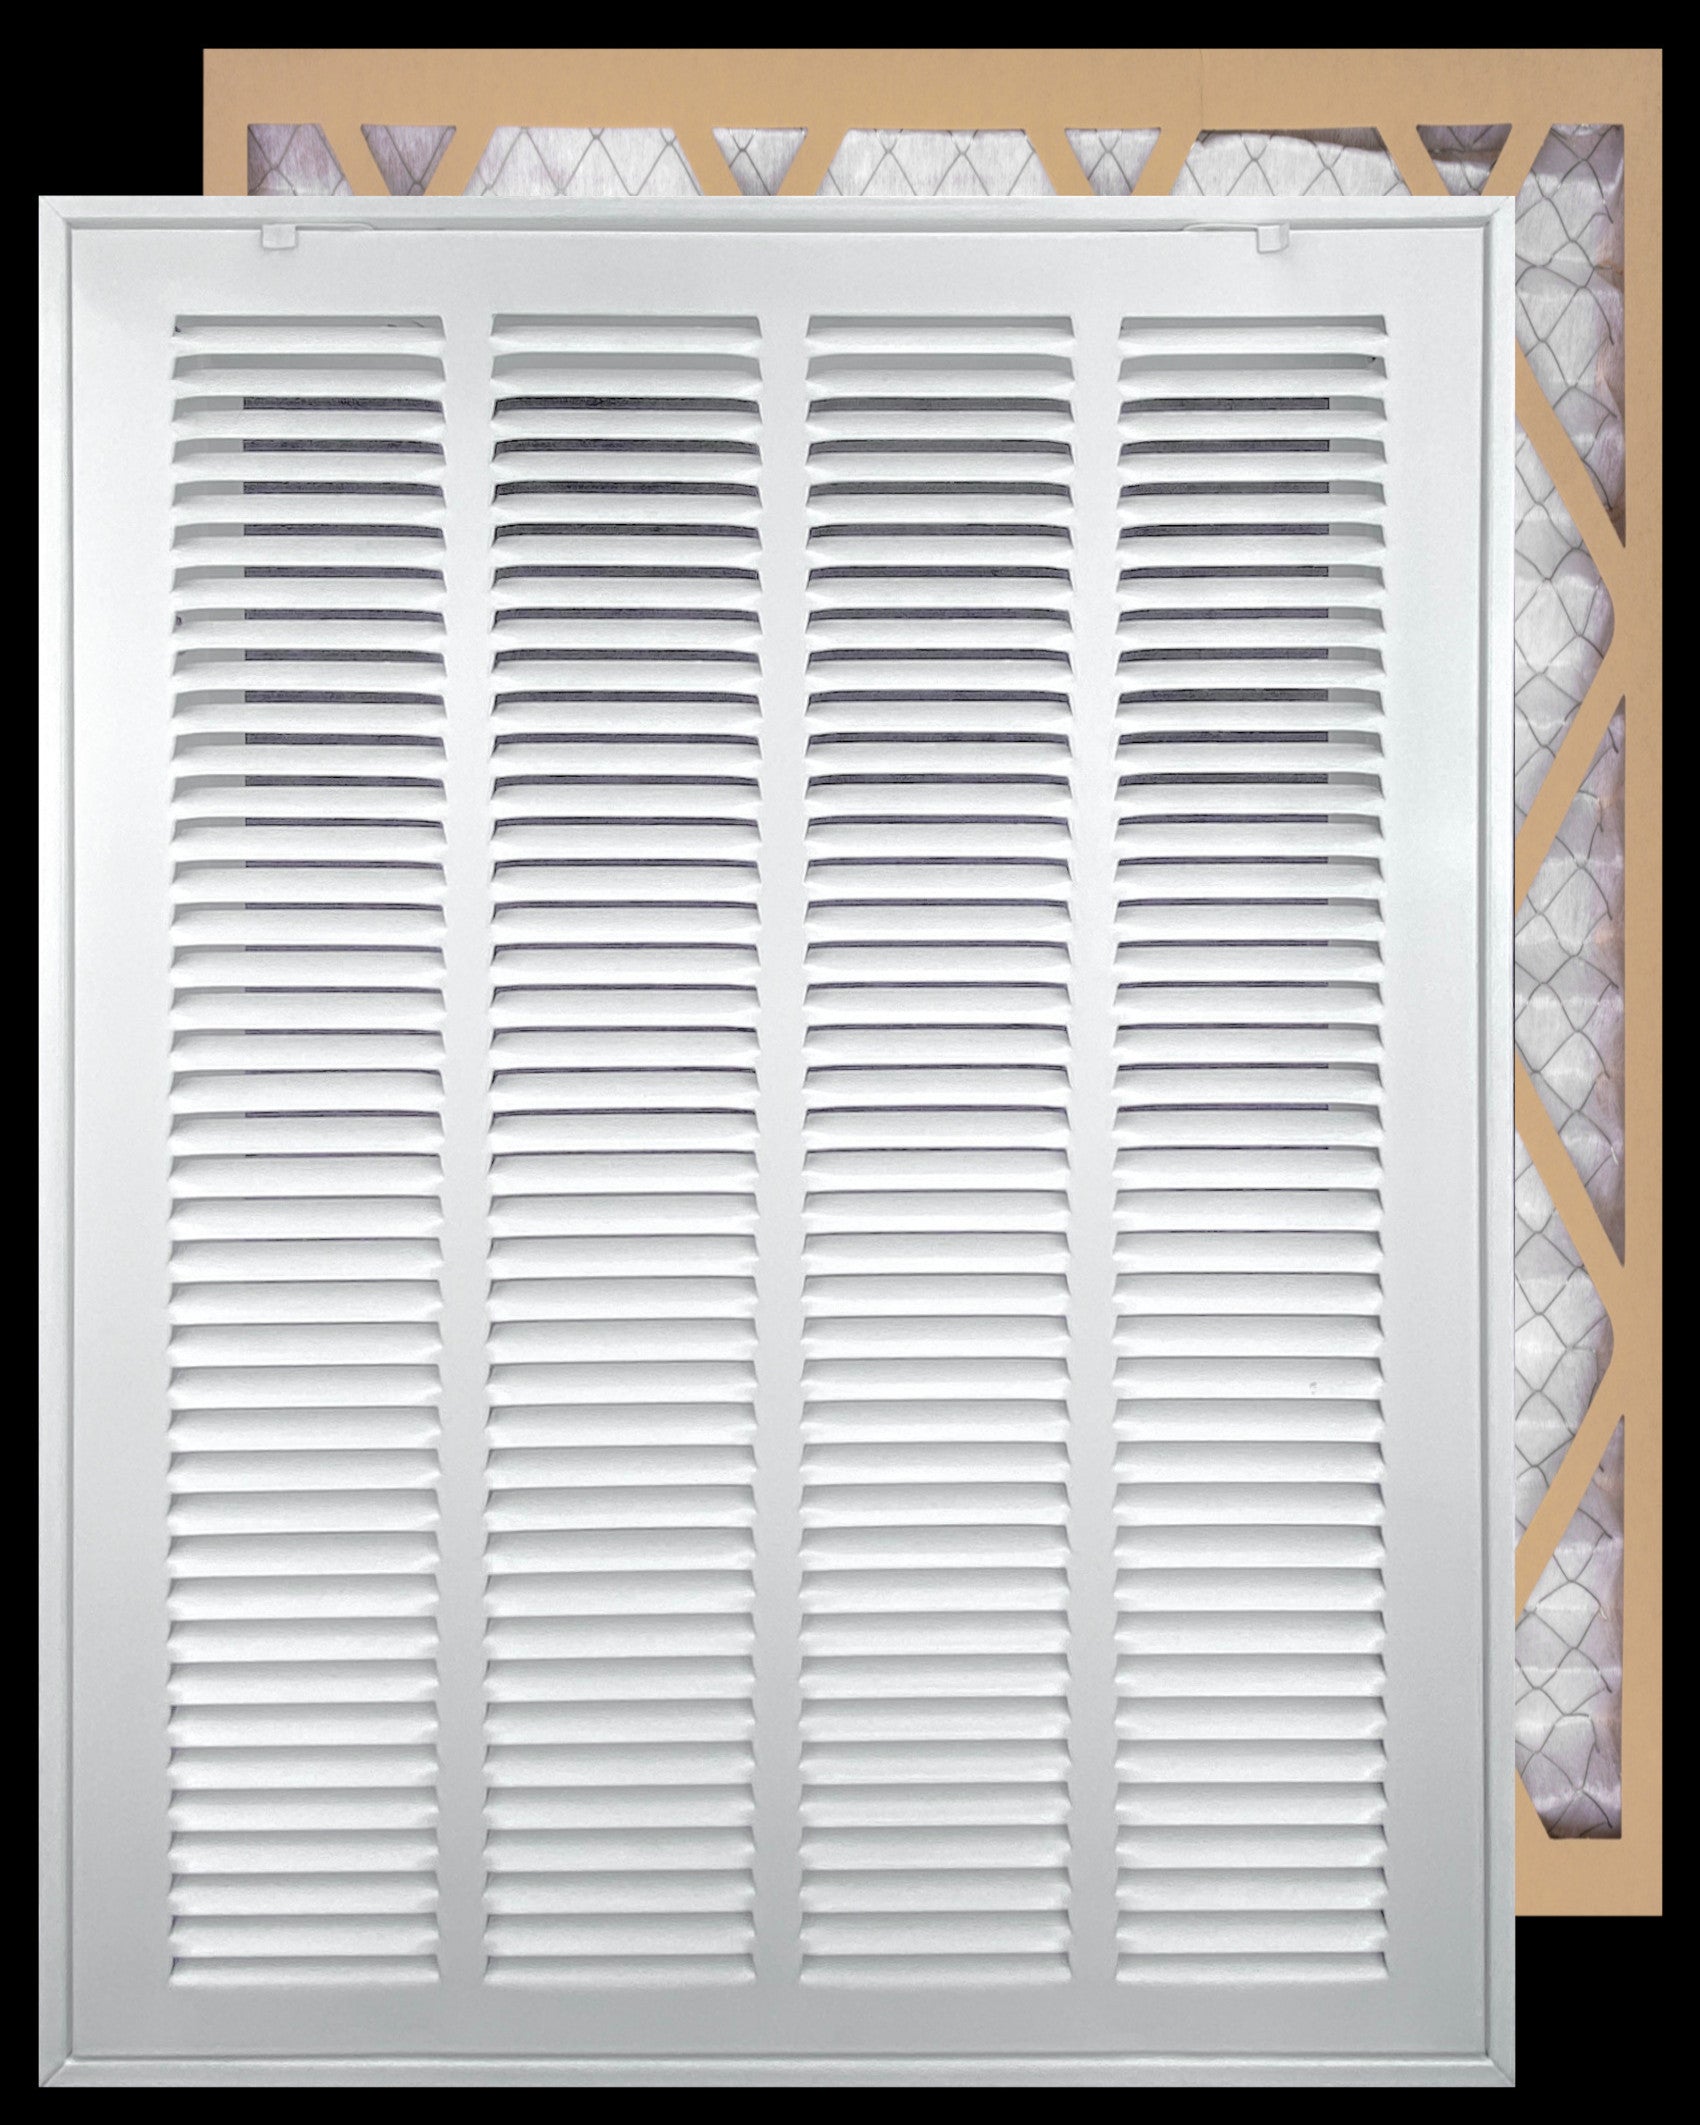 airgrilles 20" x 25" duct opening   filter included hd steel return air filter grille for sidewall and ceiling fil-7rafg1-wh-20x25 038775643917 - 1